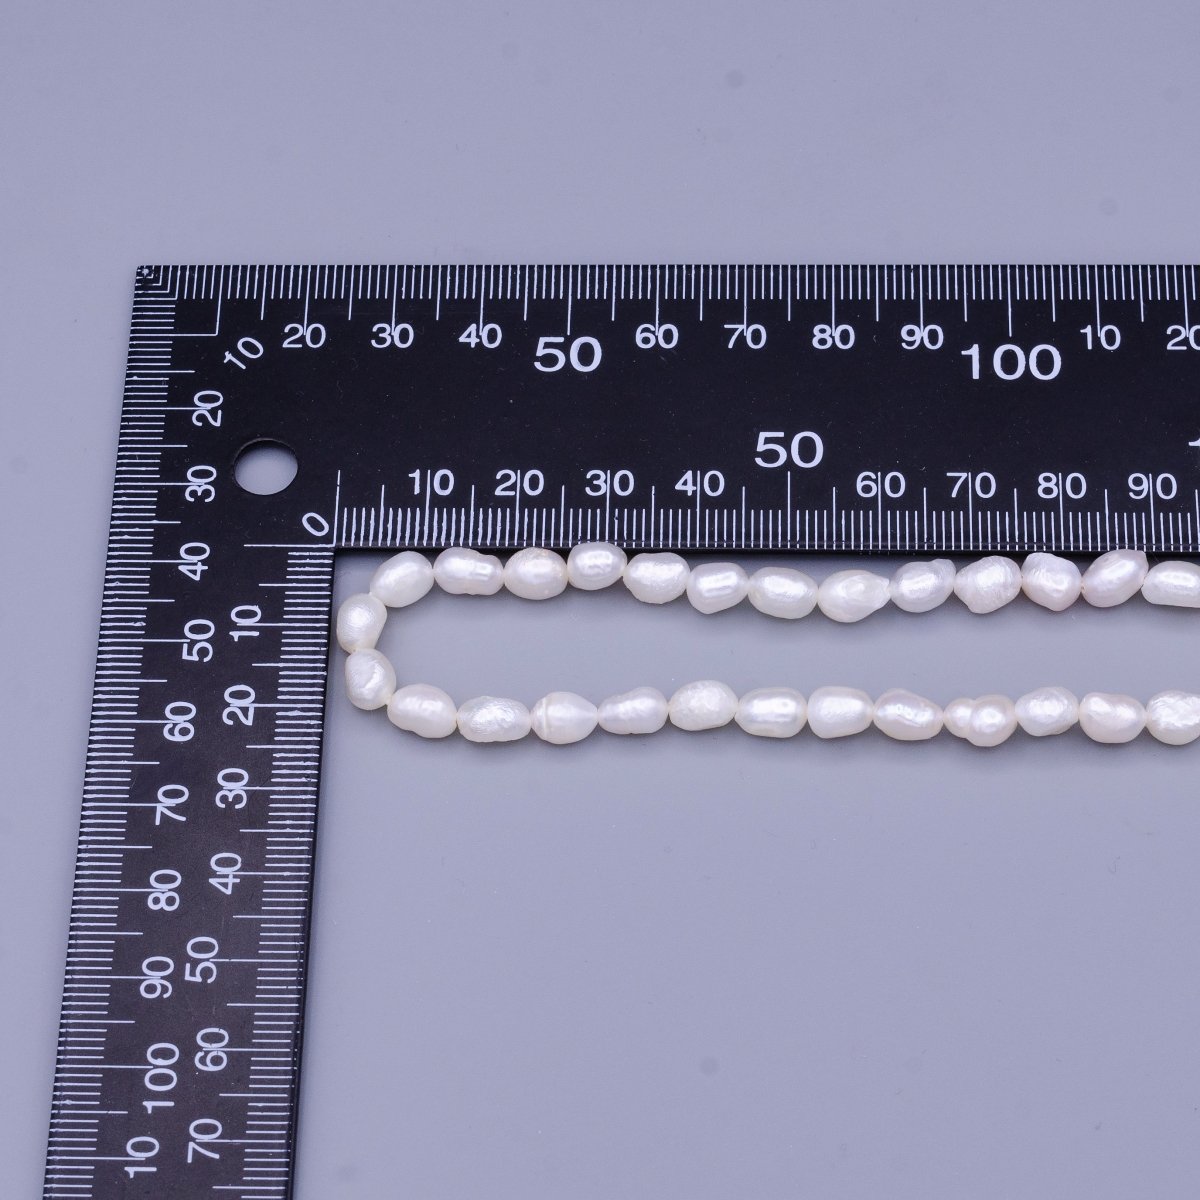 5.5mm Baroque Oval Freshwater Pearl 50 Pieces/Strand Jewelry Making Findings Supply | WA-1672 Clearance Pricing - DLUXCA